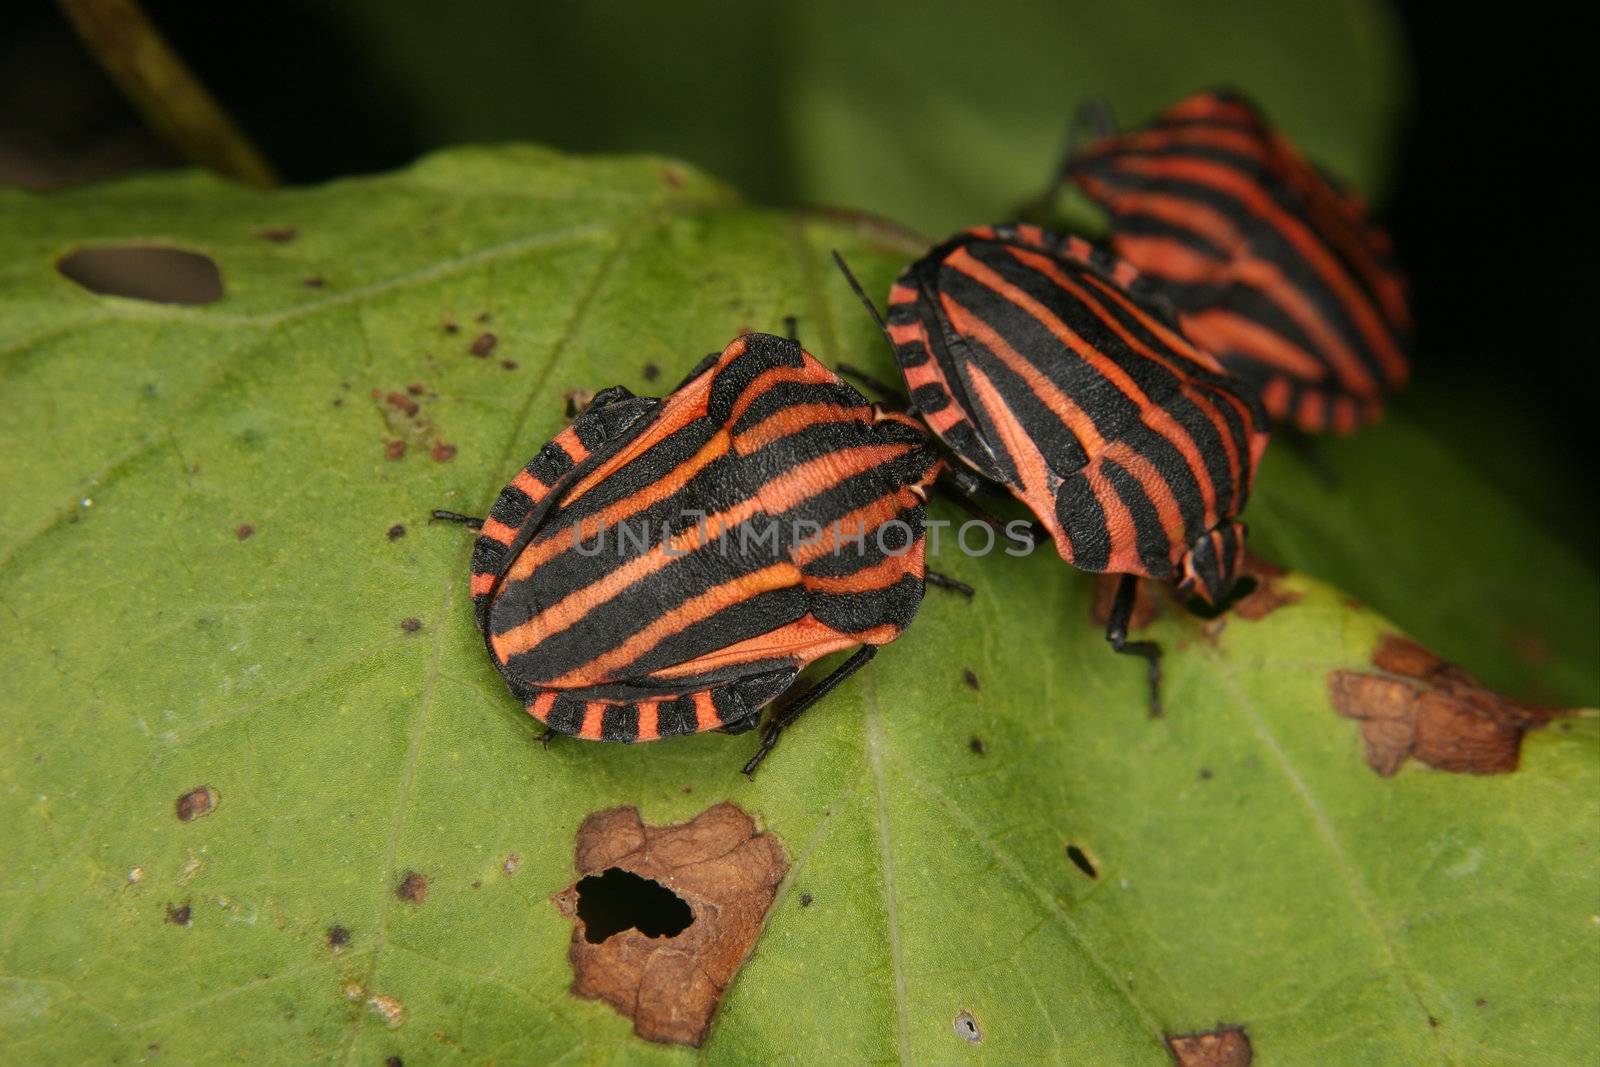 Strip bugs (Graphosoma lineatum) by tdietrich